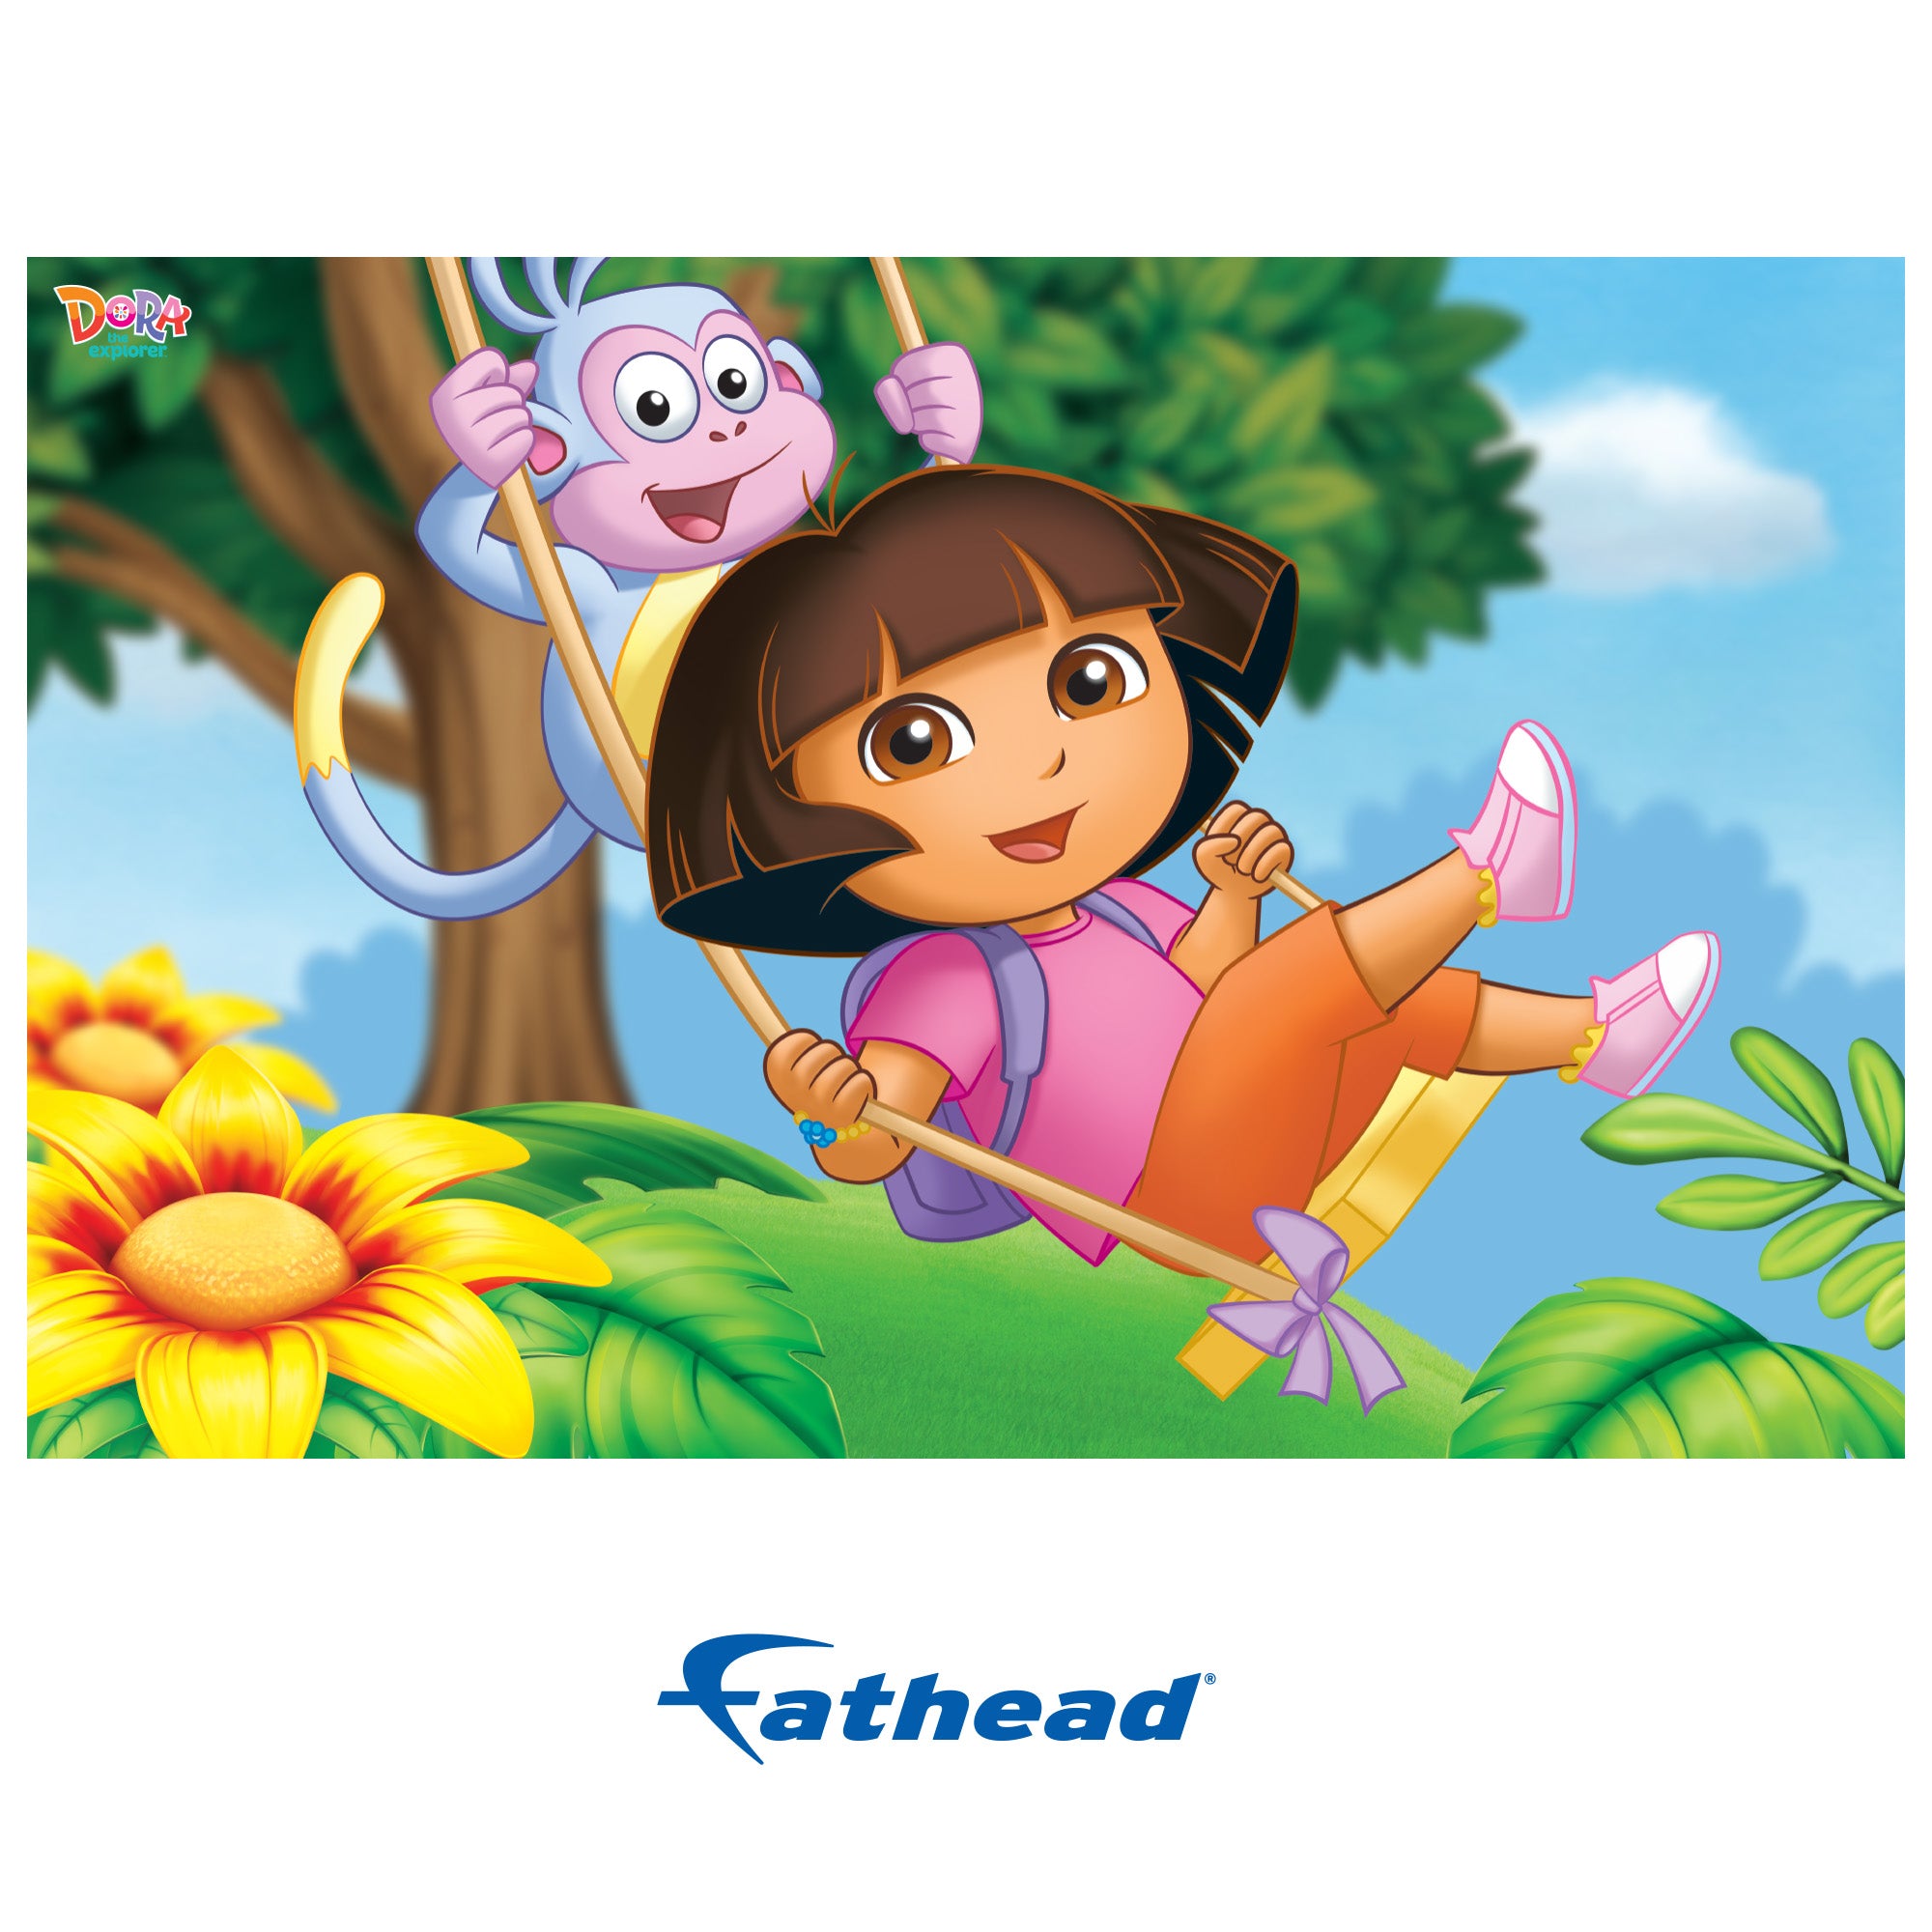 Dora the Explorer: Dora and Boots Swinging Poster - Officially Licensed  Nickelodeon Removable Adhesive Decal